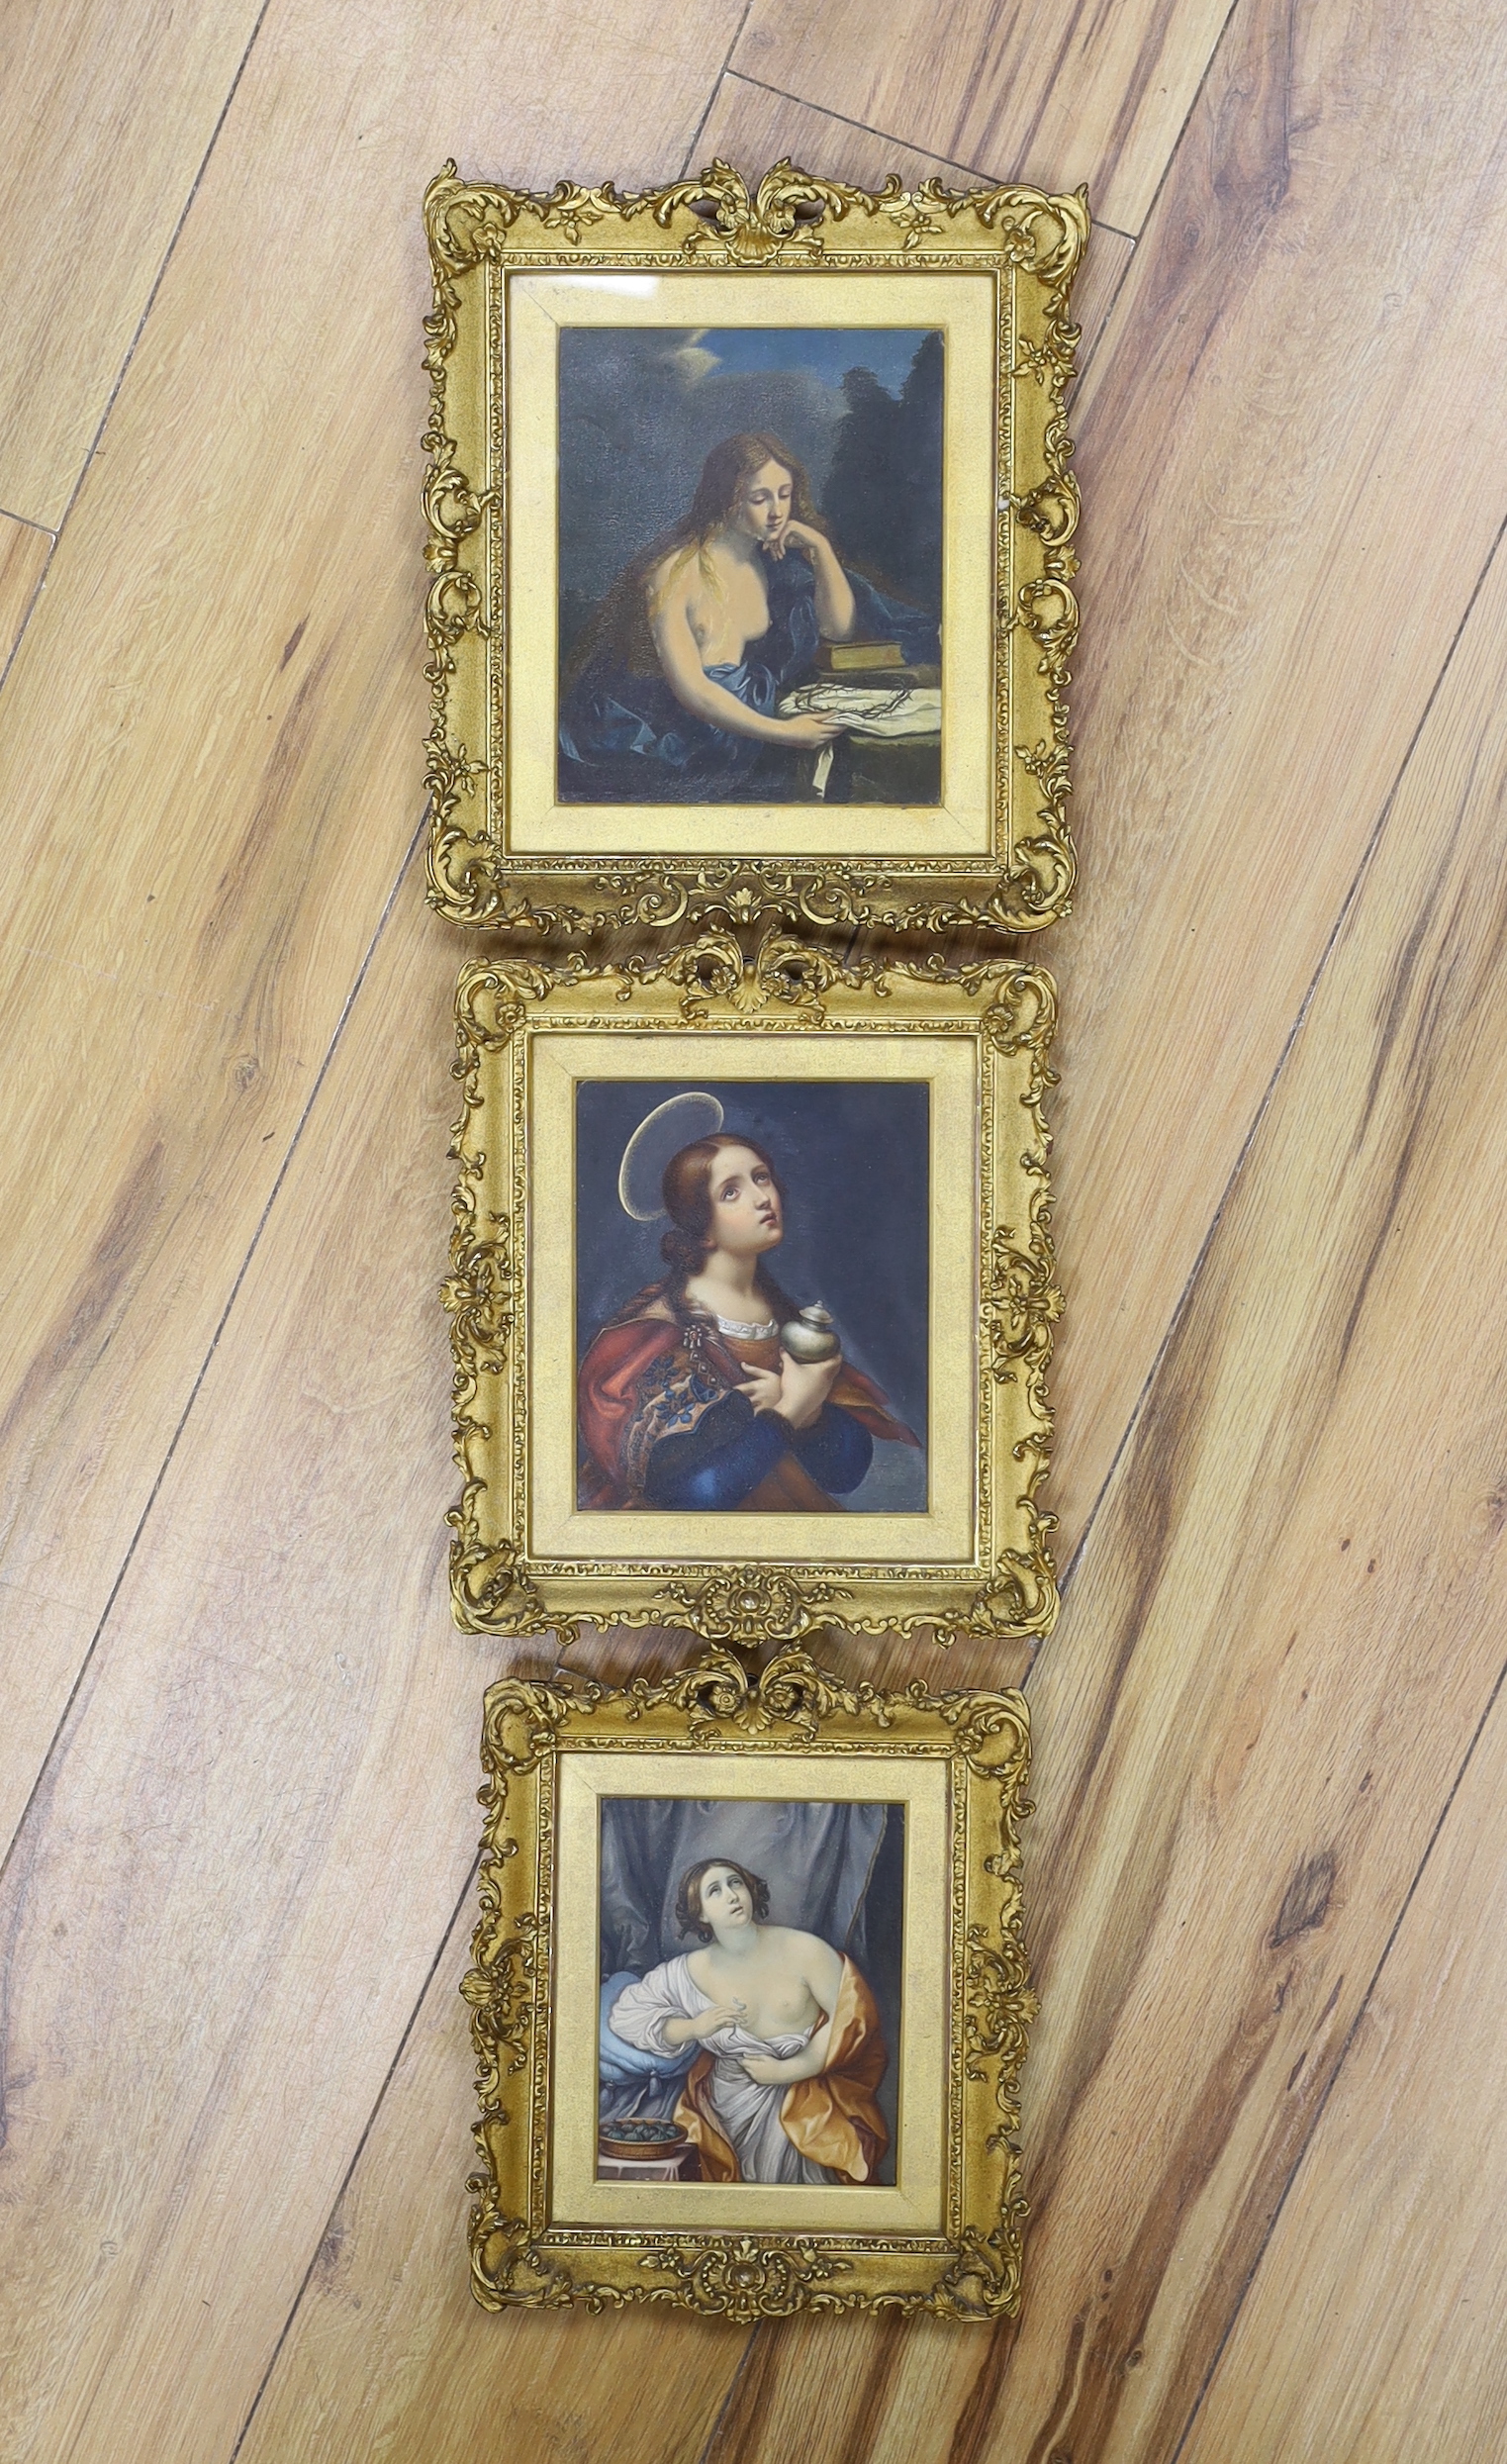 Set of three 19th century oils, Mary Magdalene with crown of thorns, The Penitent Magdalene and Cleopatra, largest 16.5 x 13cm